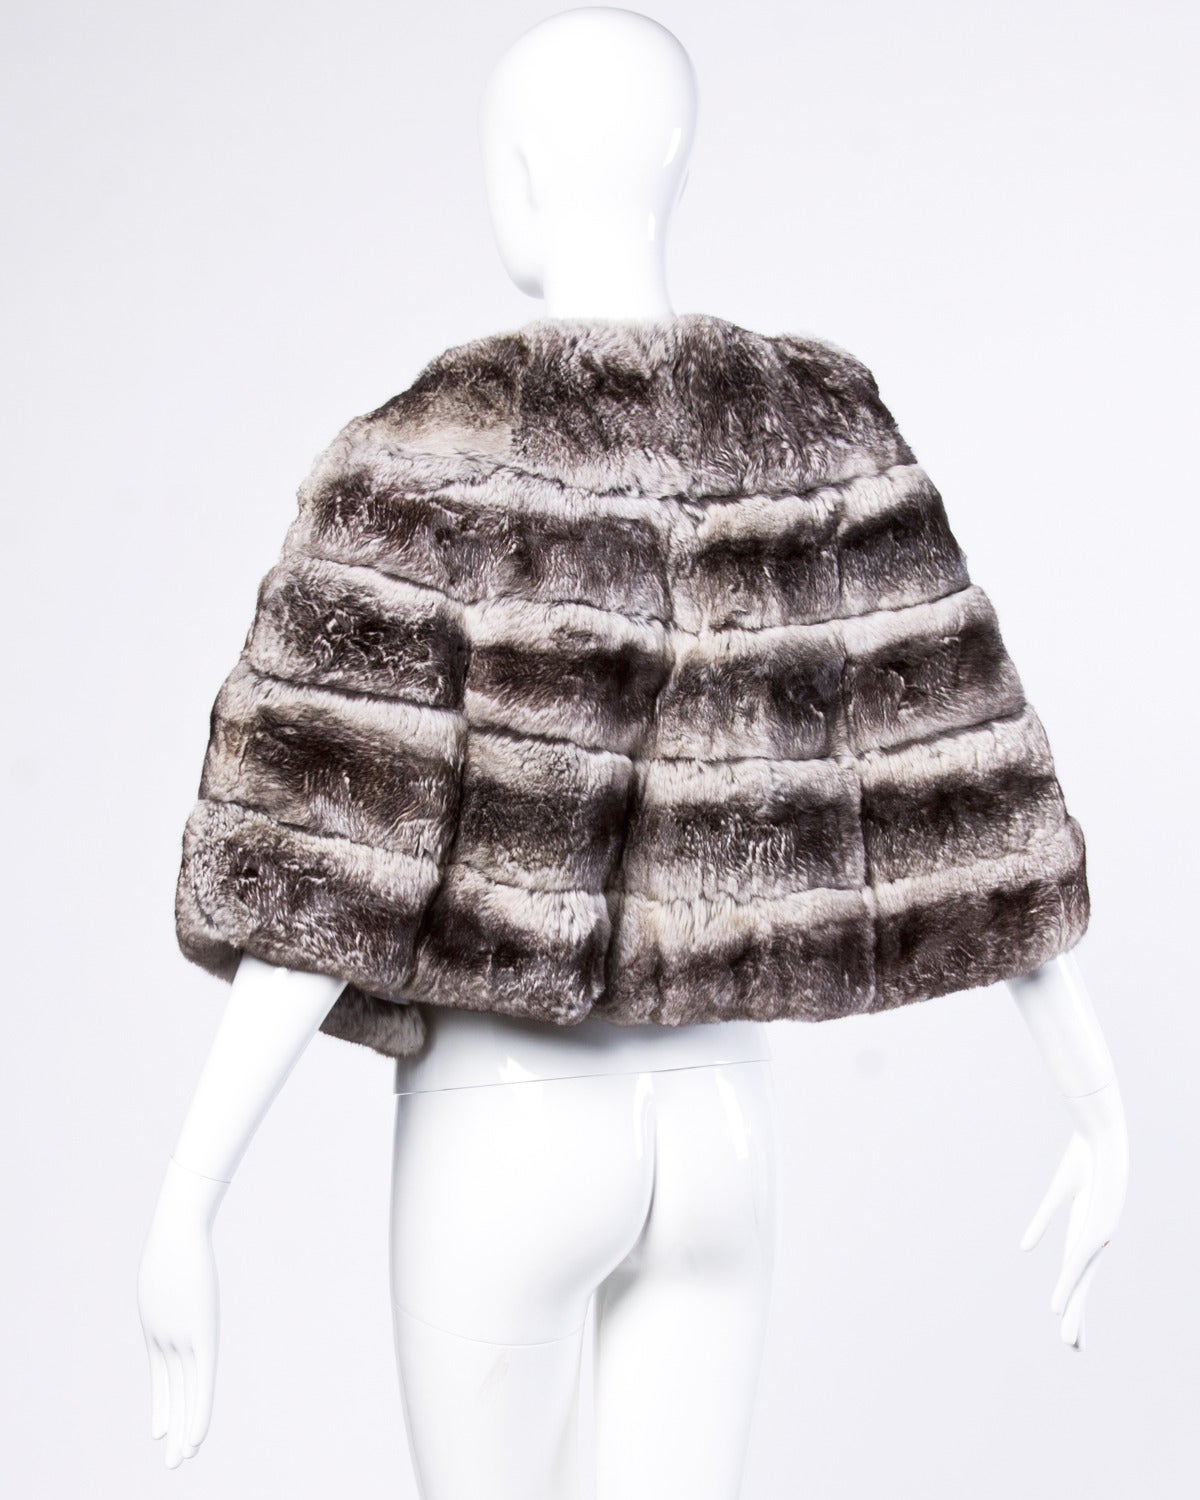 Absolutely stunning quality chinchilla fur stole, cape or wrap. Creamy soft and plush chinchilla fur is in perfect vintage condition. A rare find!

Details:

Fully Lined
Front Hook Closure
Estimated Size: Small-Large
Color: Gray/